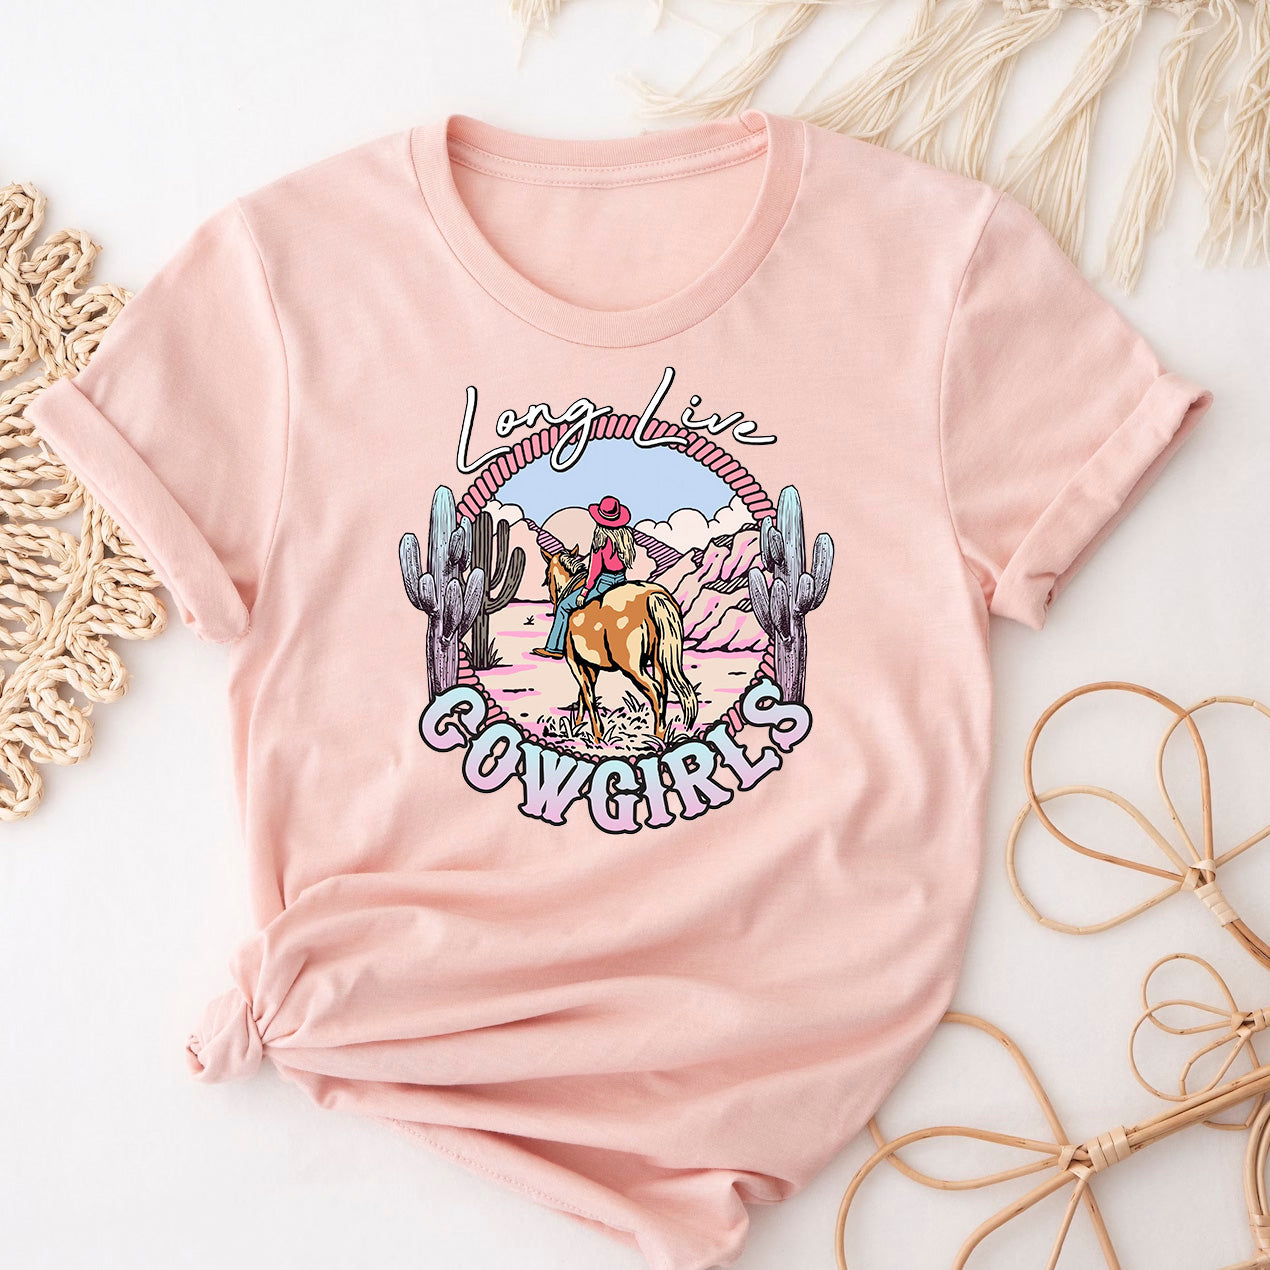 Western Elegance: Long Live Cowgirl T-shirt – A Cowgirl Gift